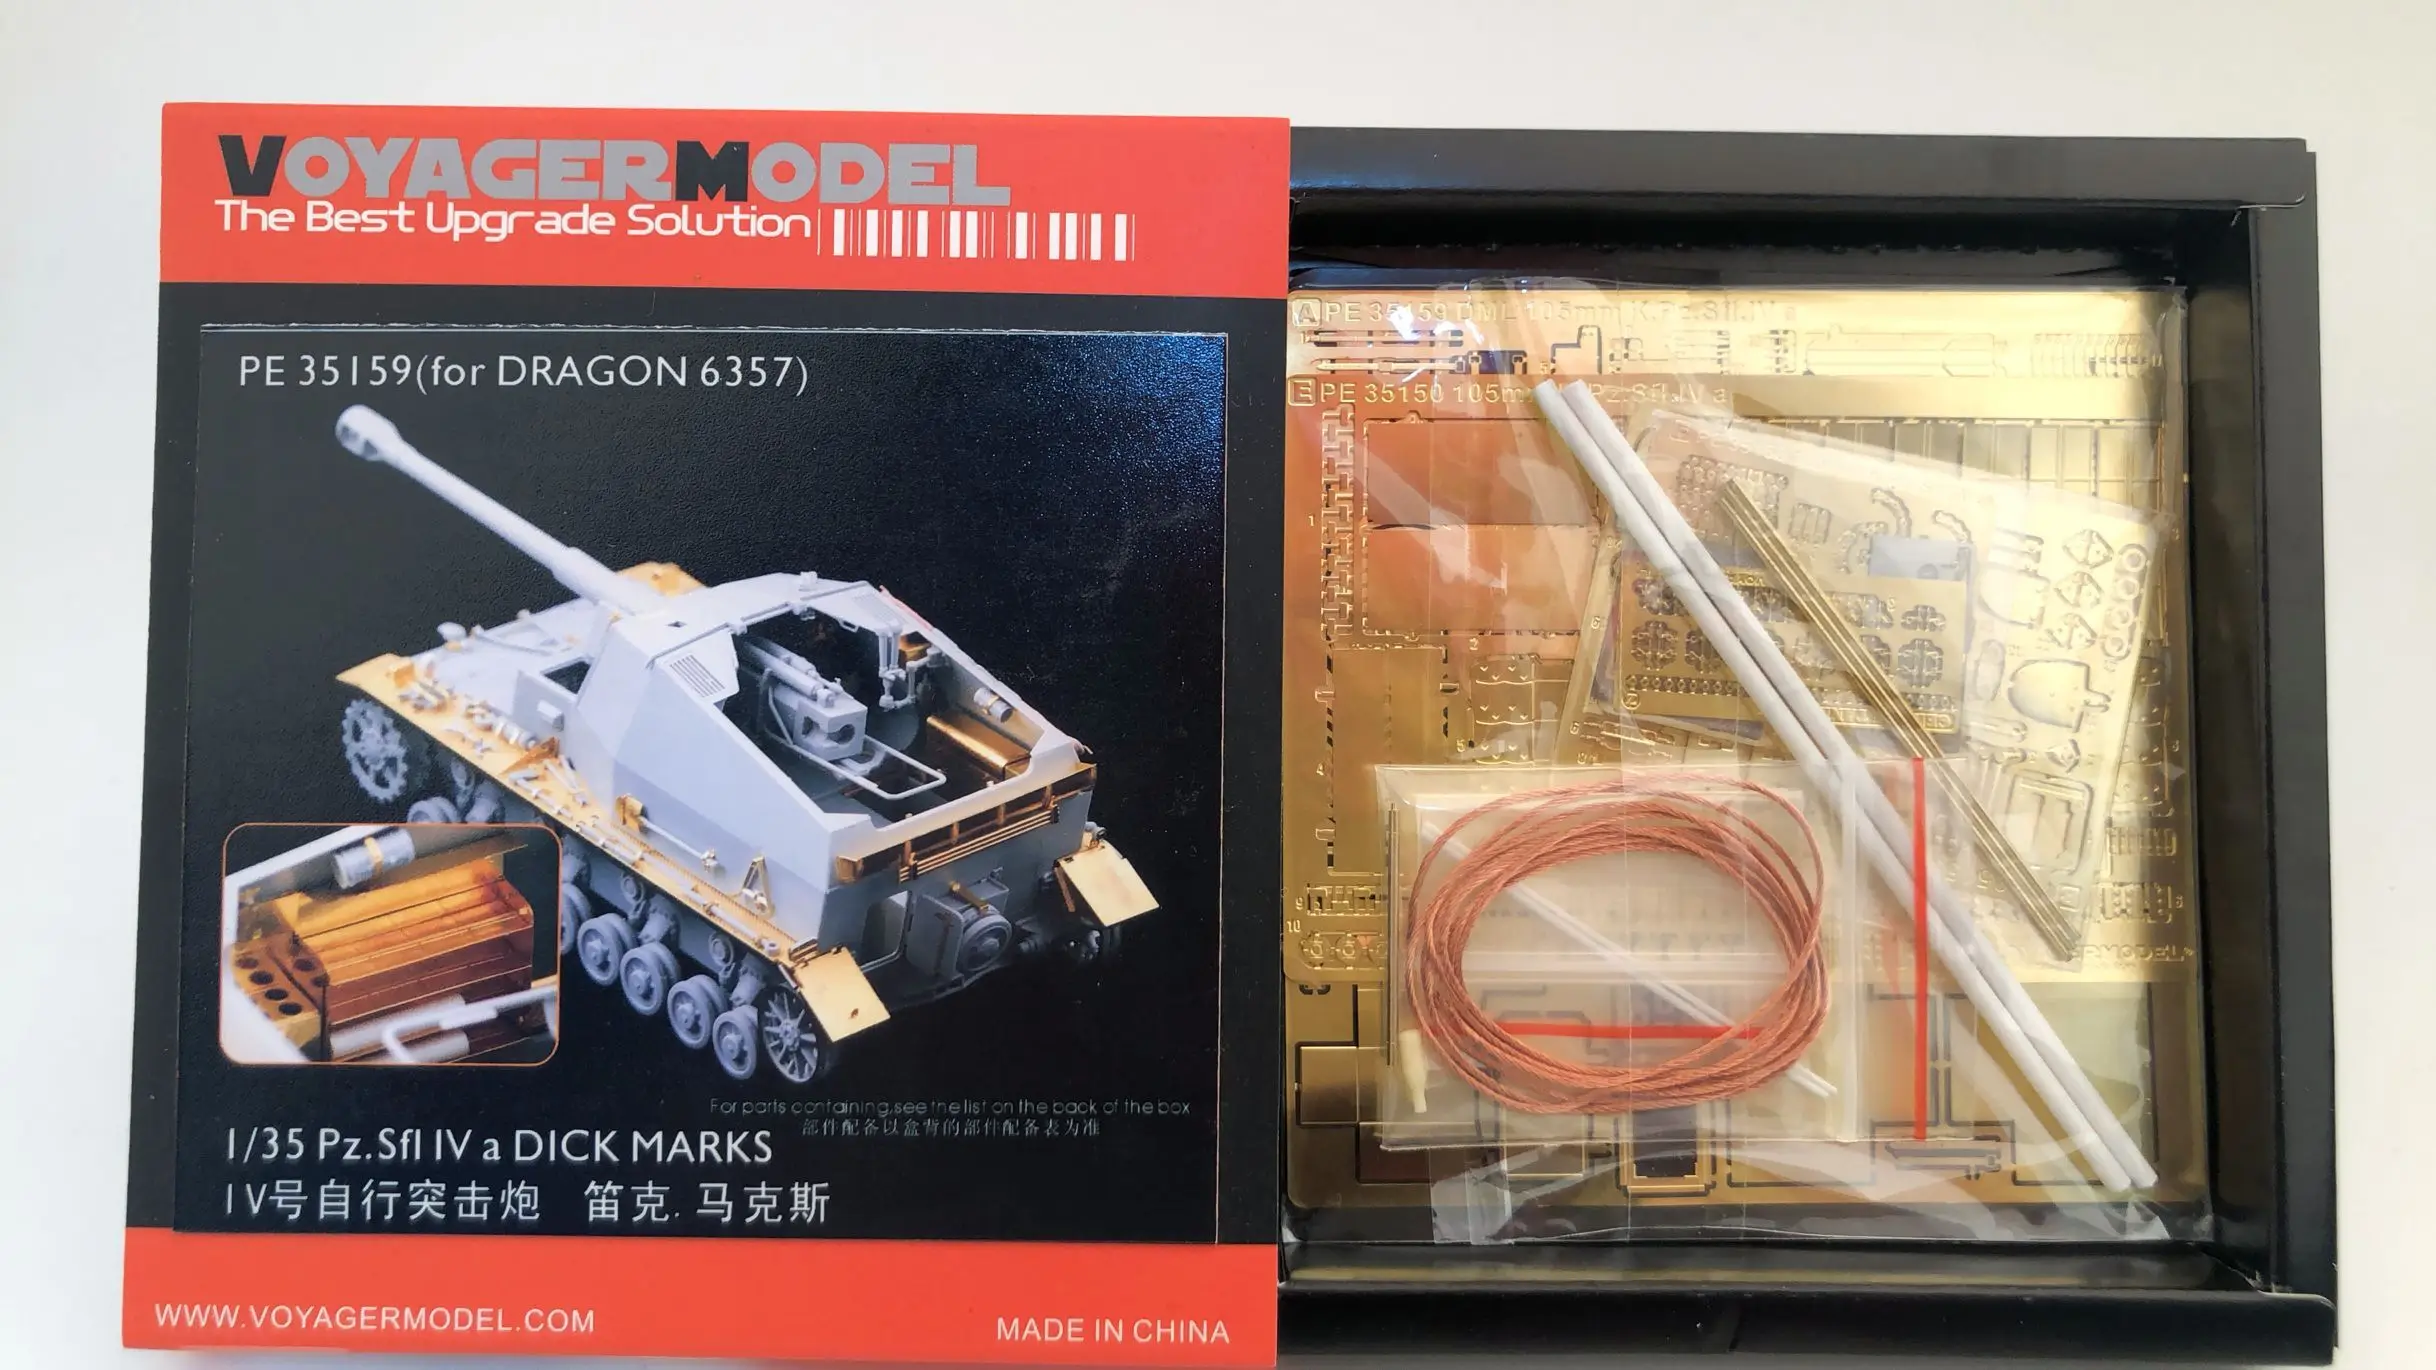 

PE35159 1/35 Pz.Sfl IV a DICK MARKS (For DRAGON 6357)